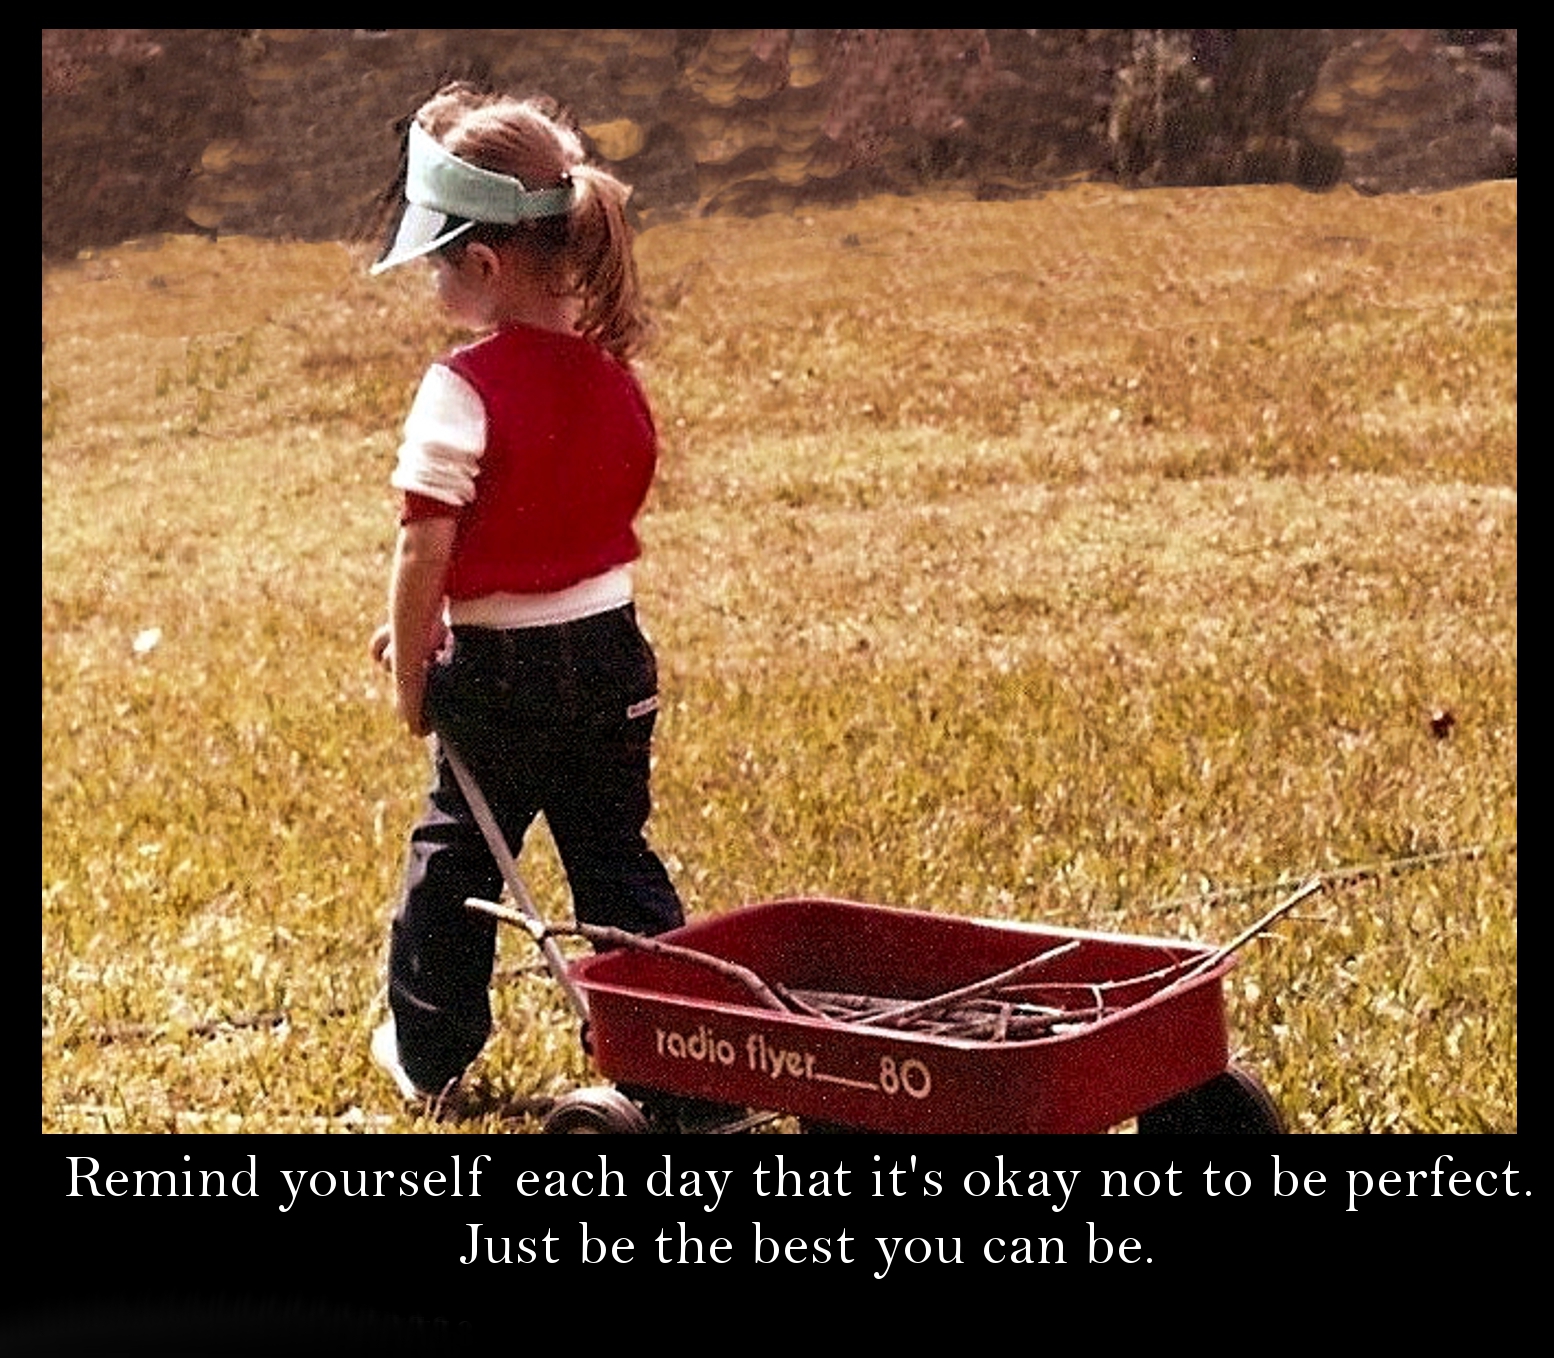 grass - radio flyer_80 Remind yourself each day that it's okay not to be perfect. Just be the best you can be.